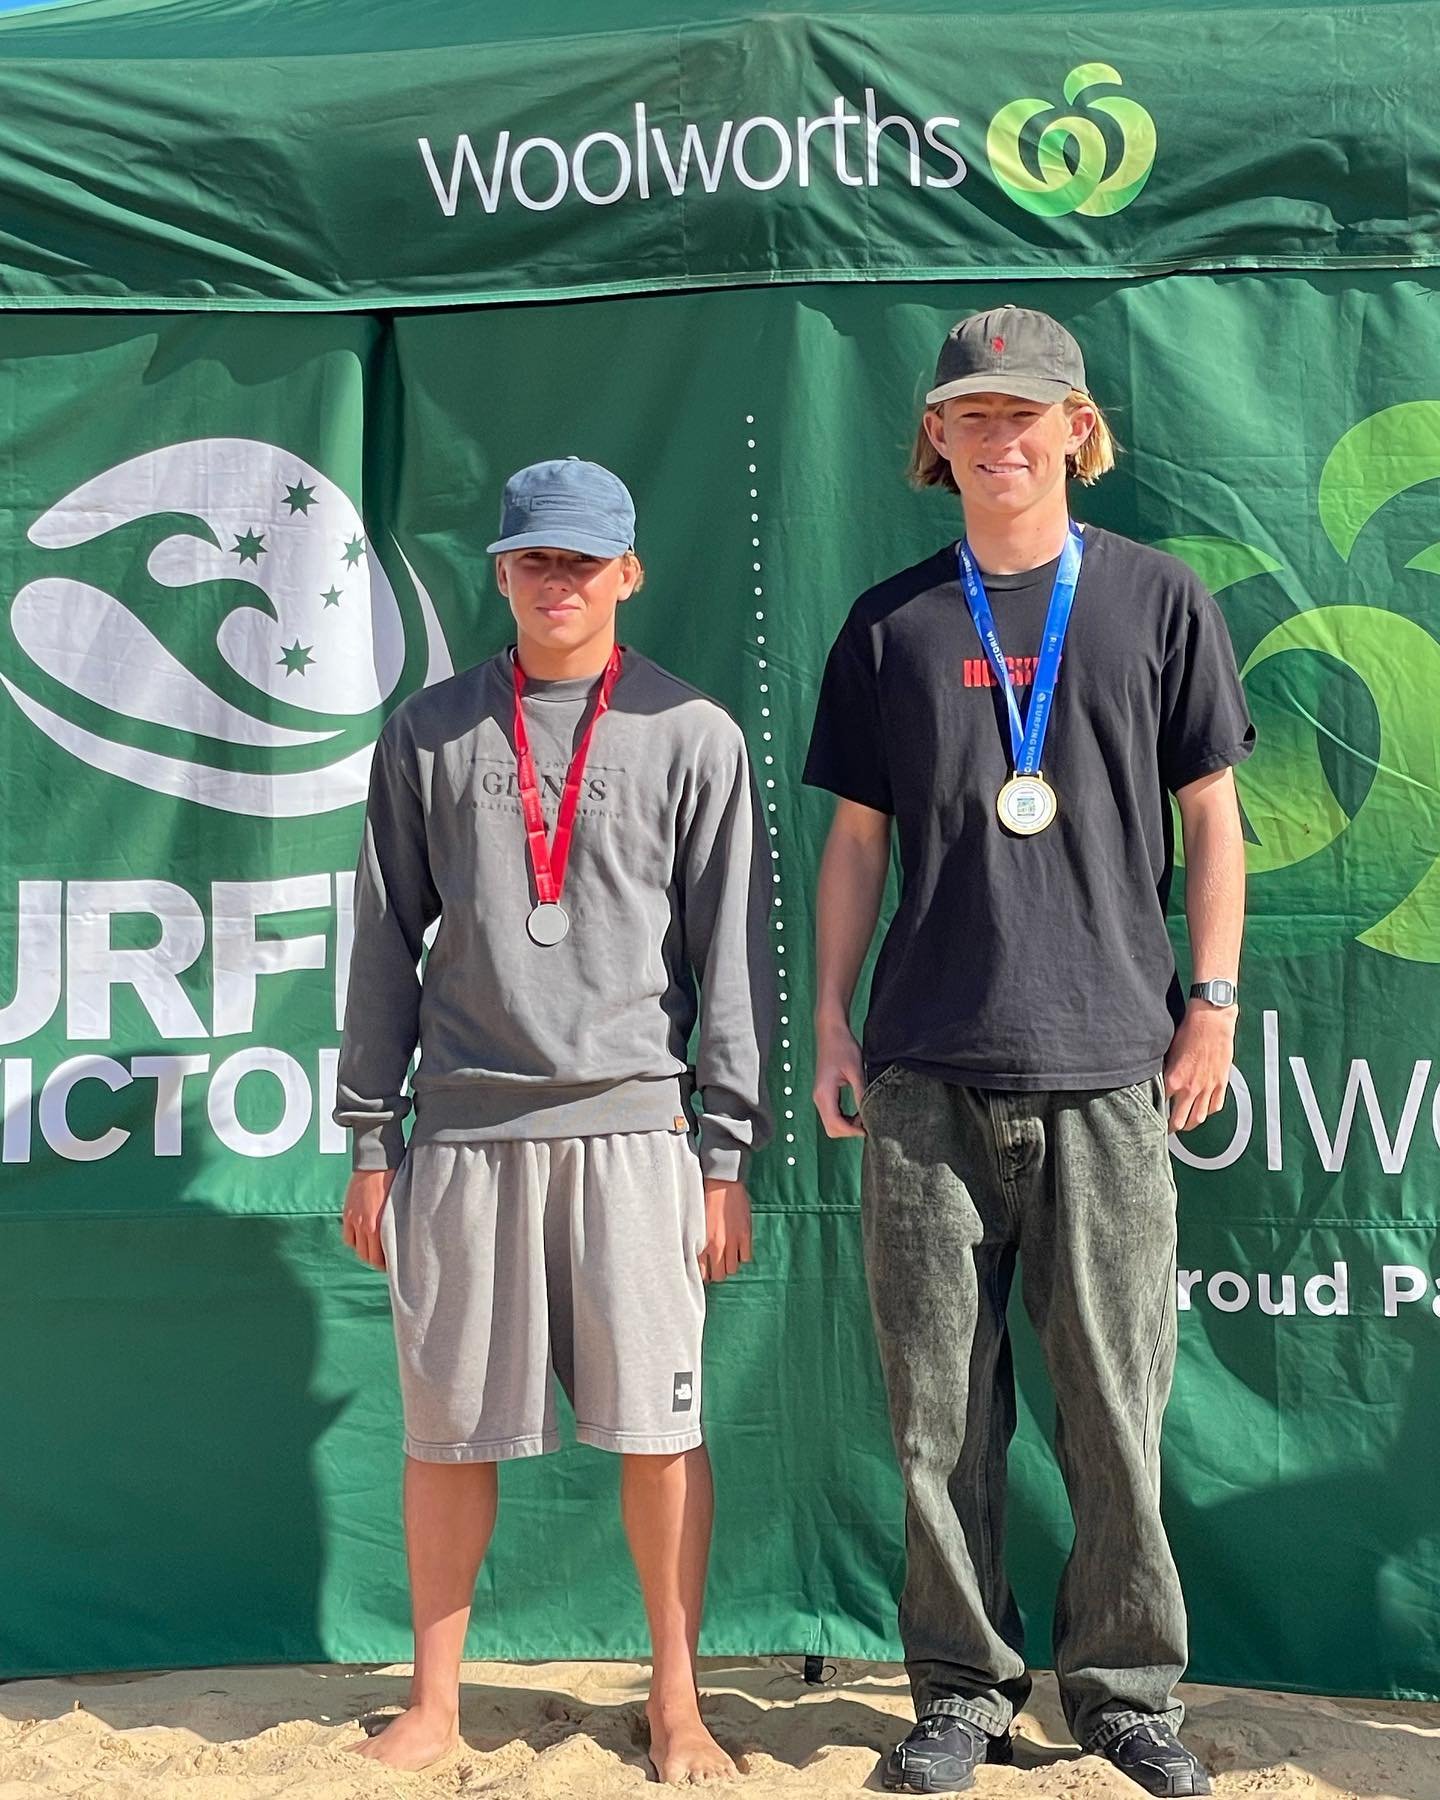 Congratulations to @maxybro04 (2nd place) and @jerrykelly__ (3rd place) at the third and final Junior State Titles held at Phillip Island on the weekend. There was a great show of 13th Beach Boardriders talent over the weekend. Well done to all who c